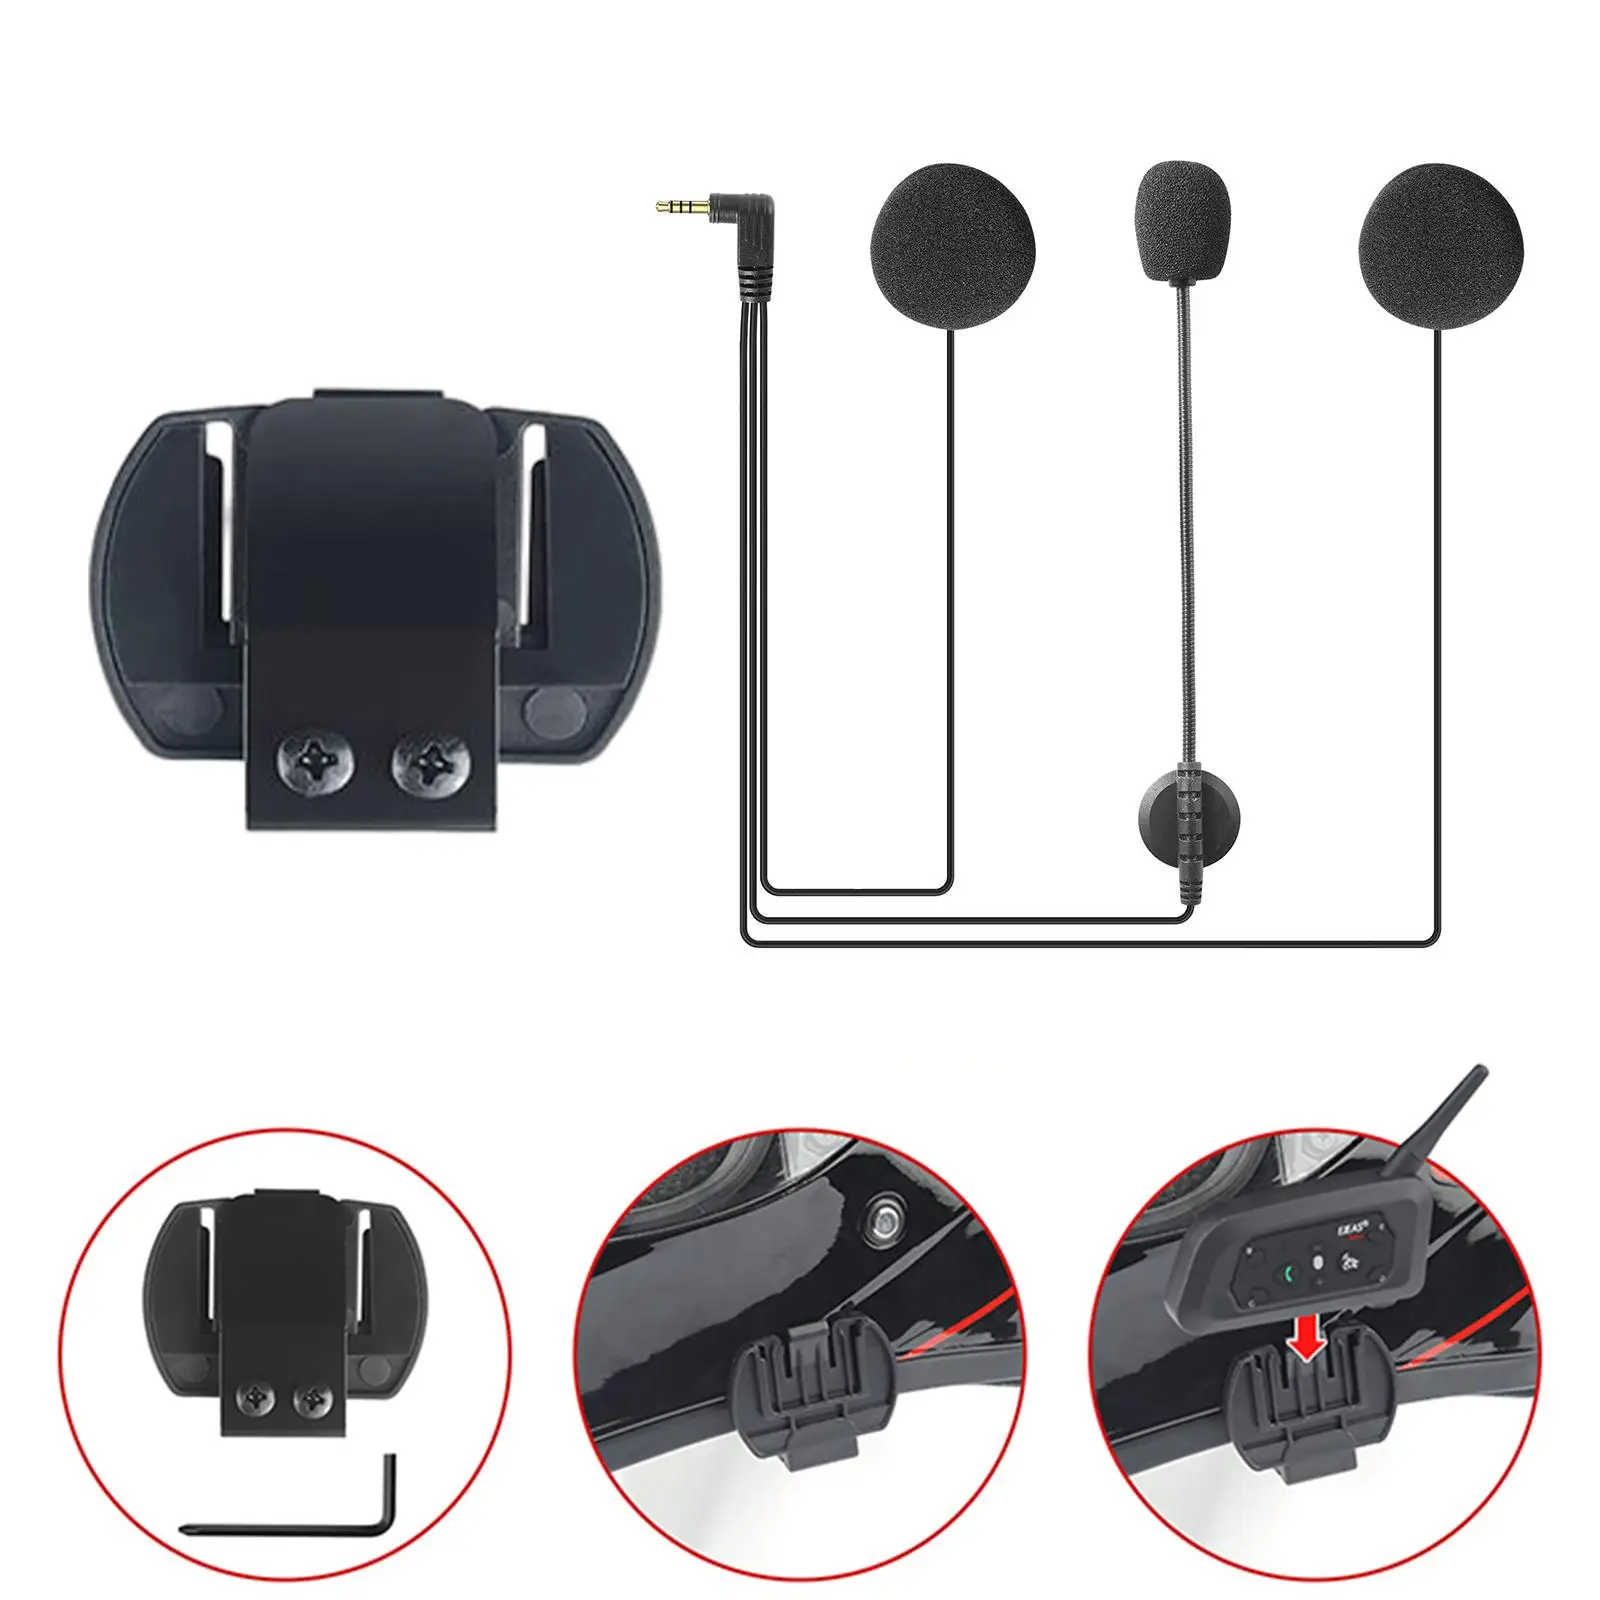 Professional Motorcycle Helmet Intercom Interphone Hands Free Easy to Use Motorcycle Helmet Headset for V4 V6 Motorcycle Driving